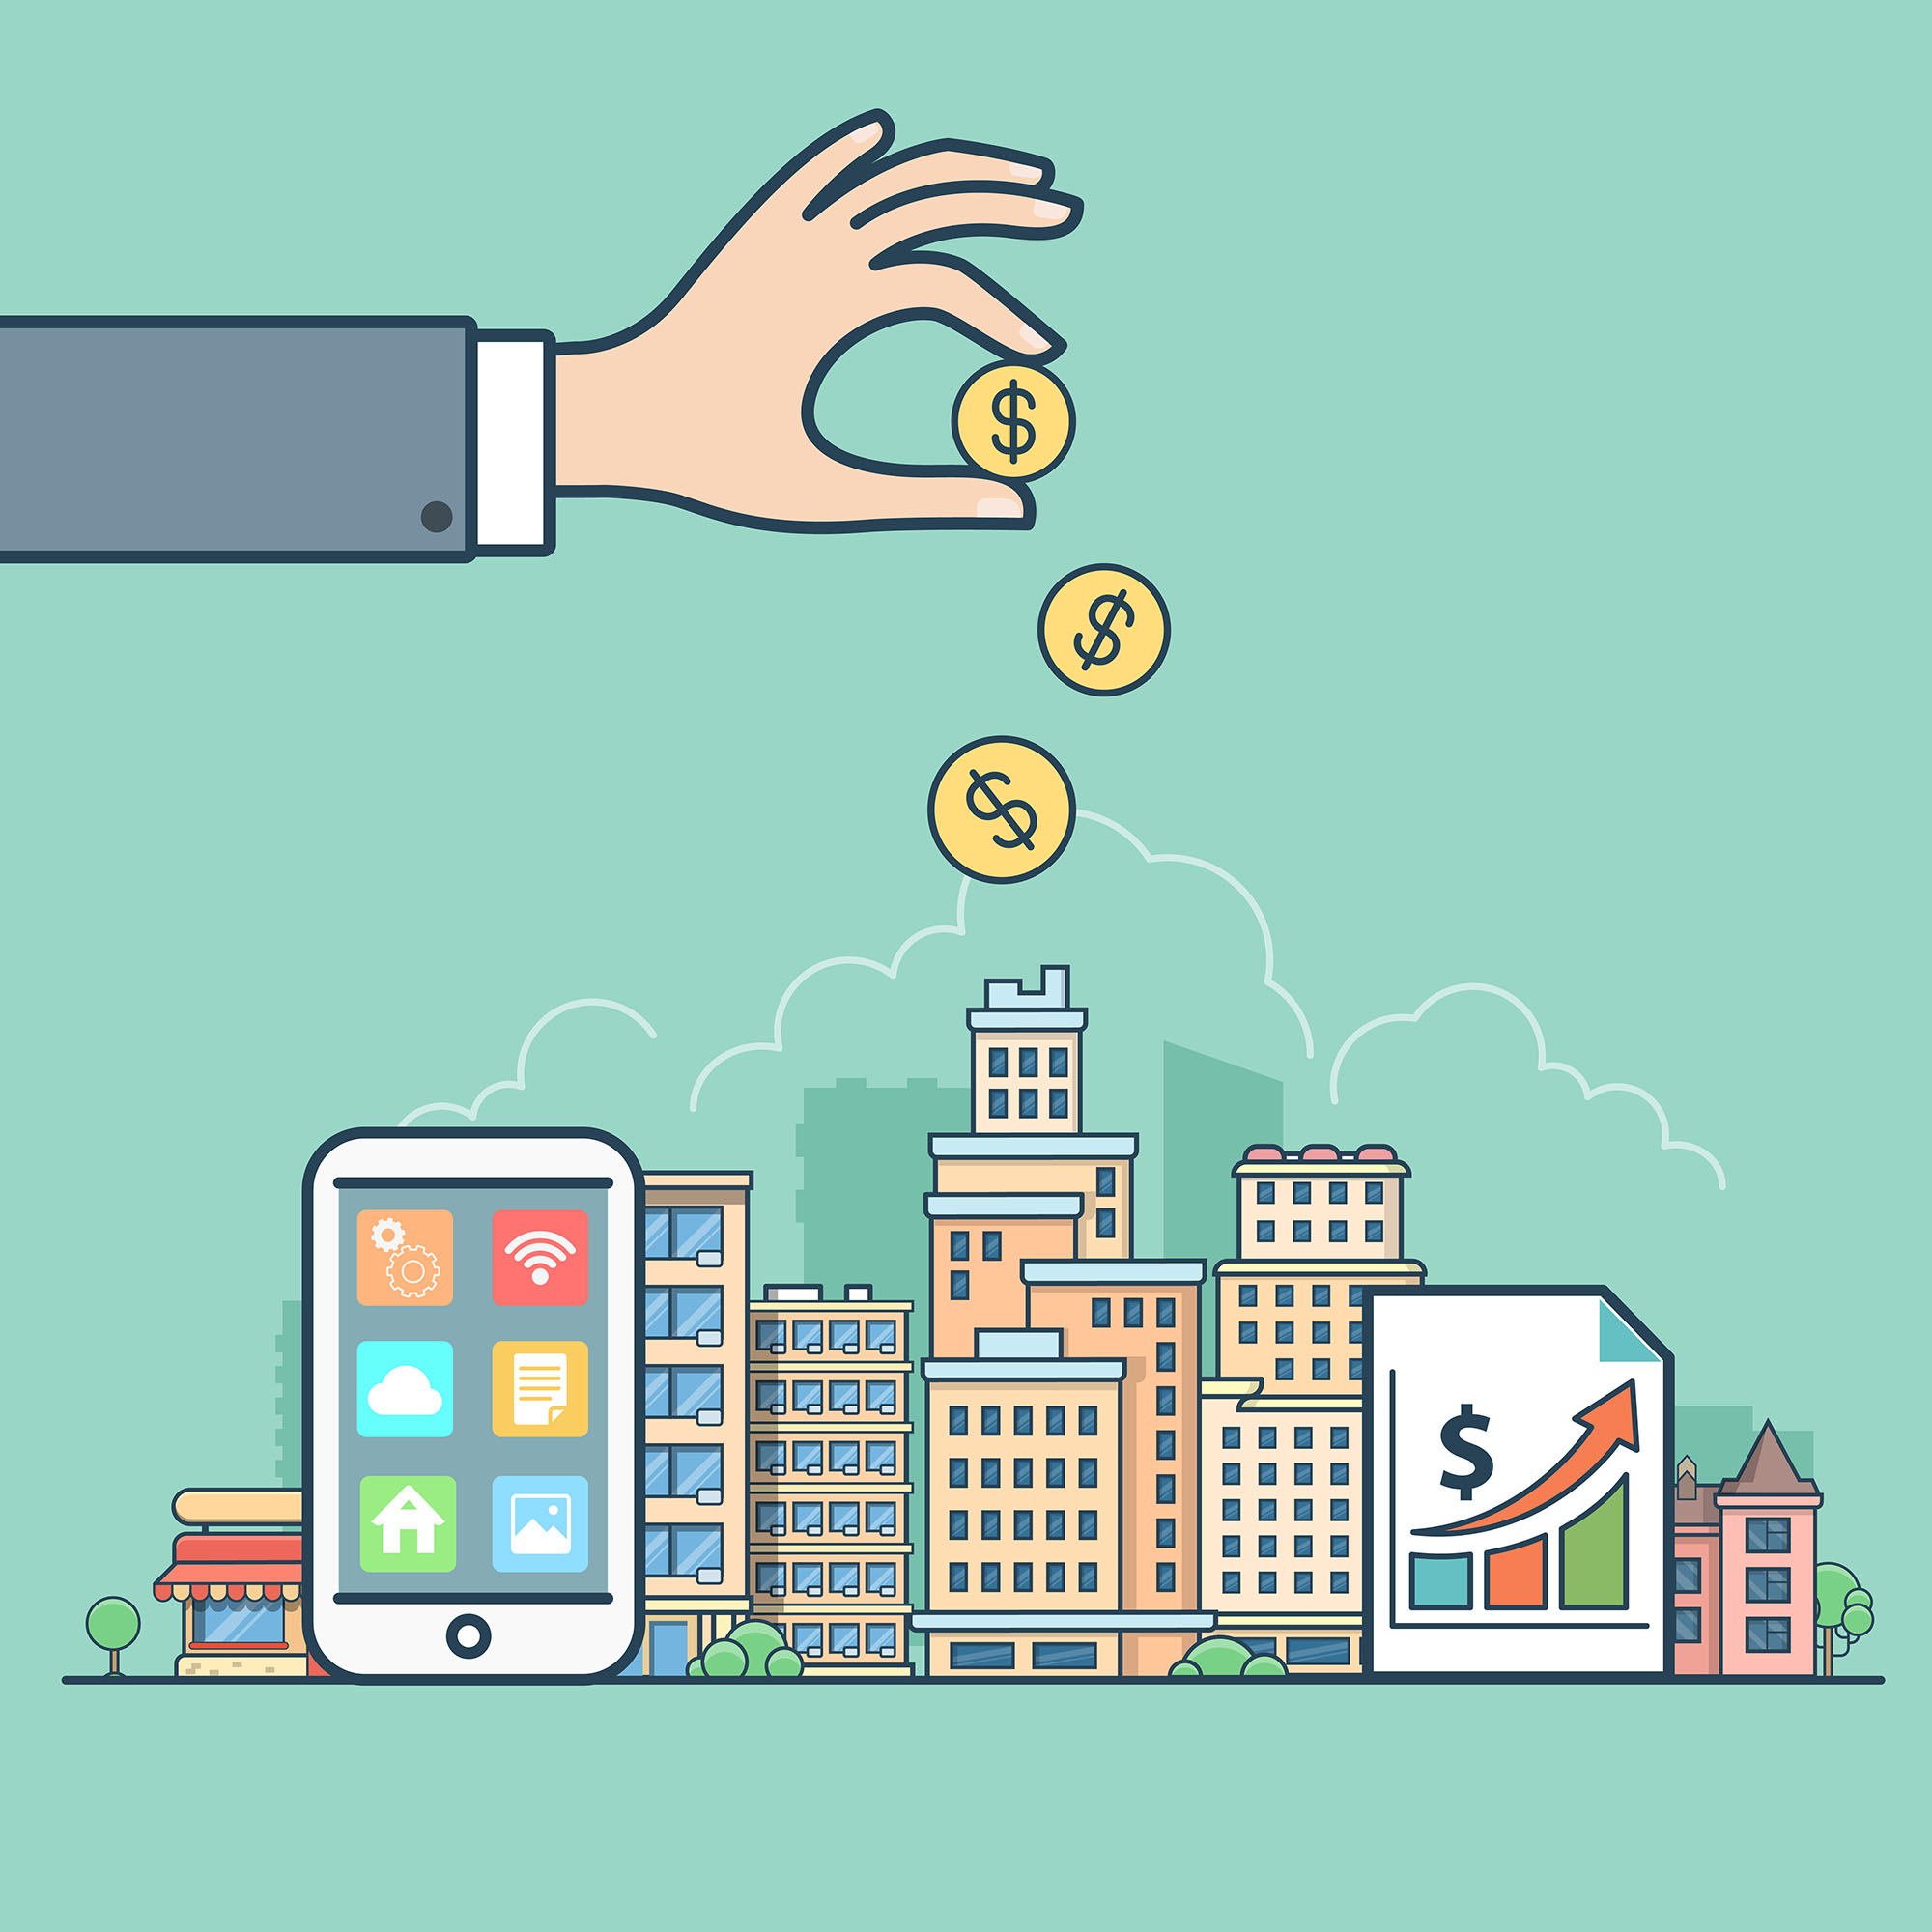 Linear flat Real Estate profit icons website vector illustration. Realtor hand coins money and smartphone on Urban buildings city landscape. Architecture sale rental property retail